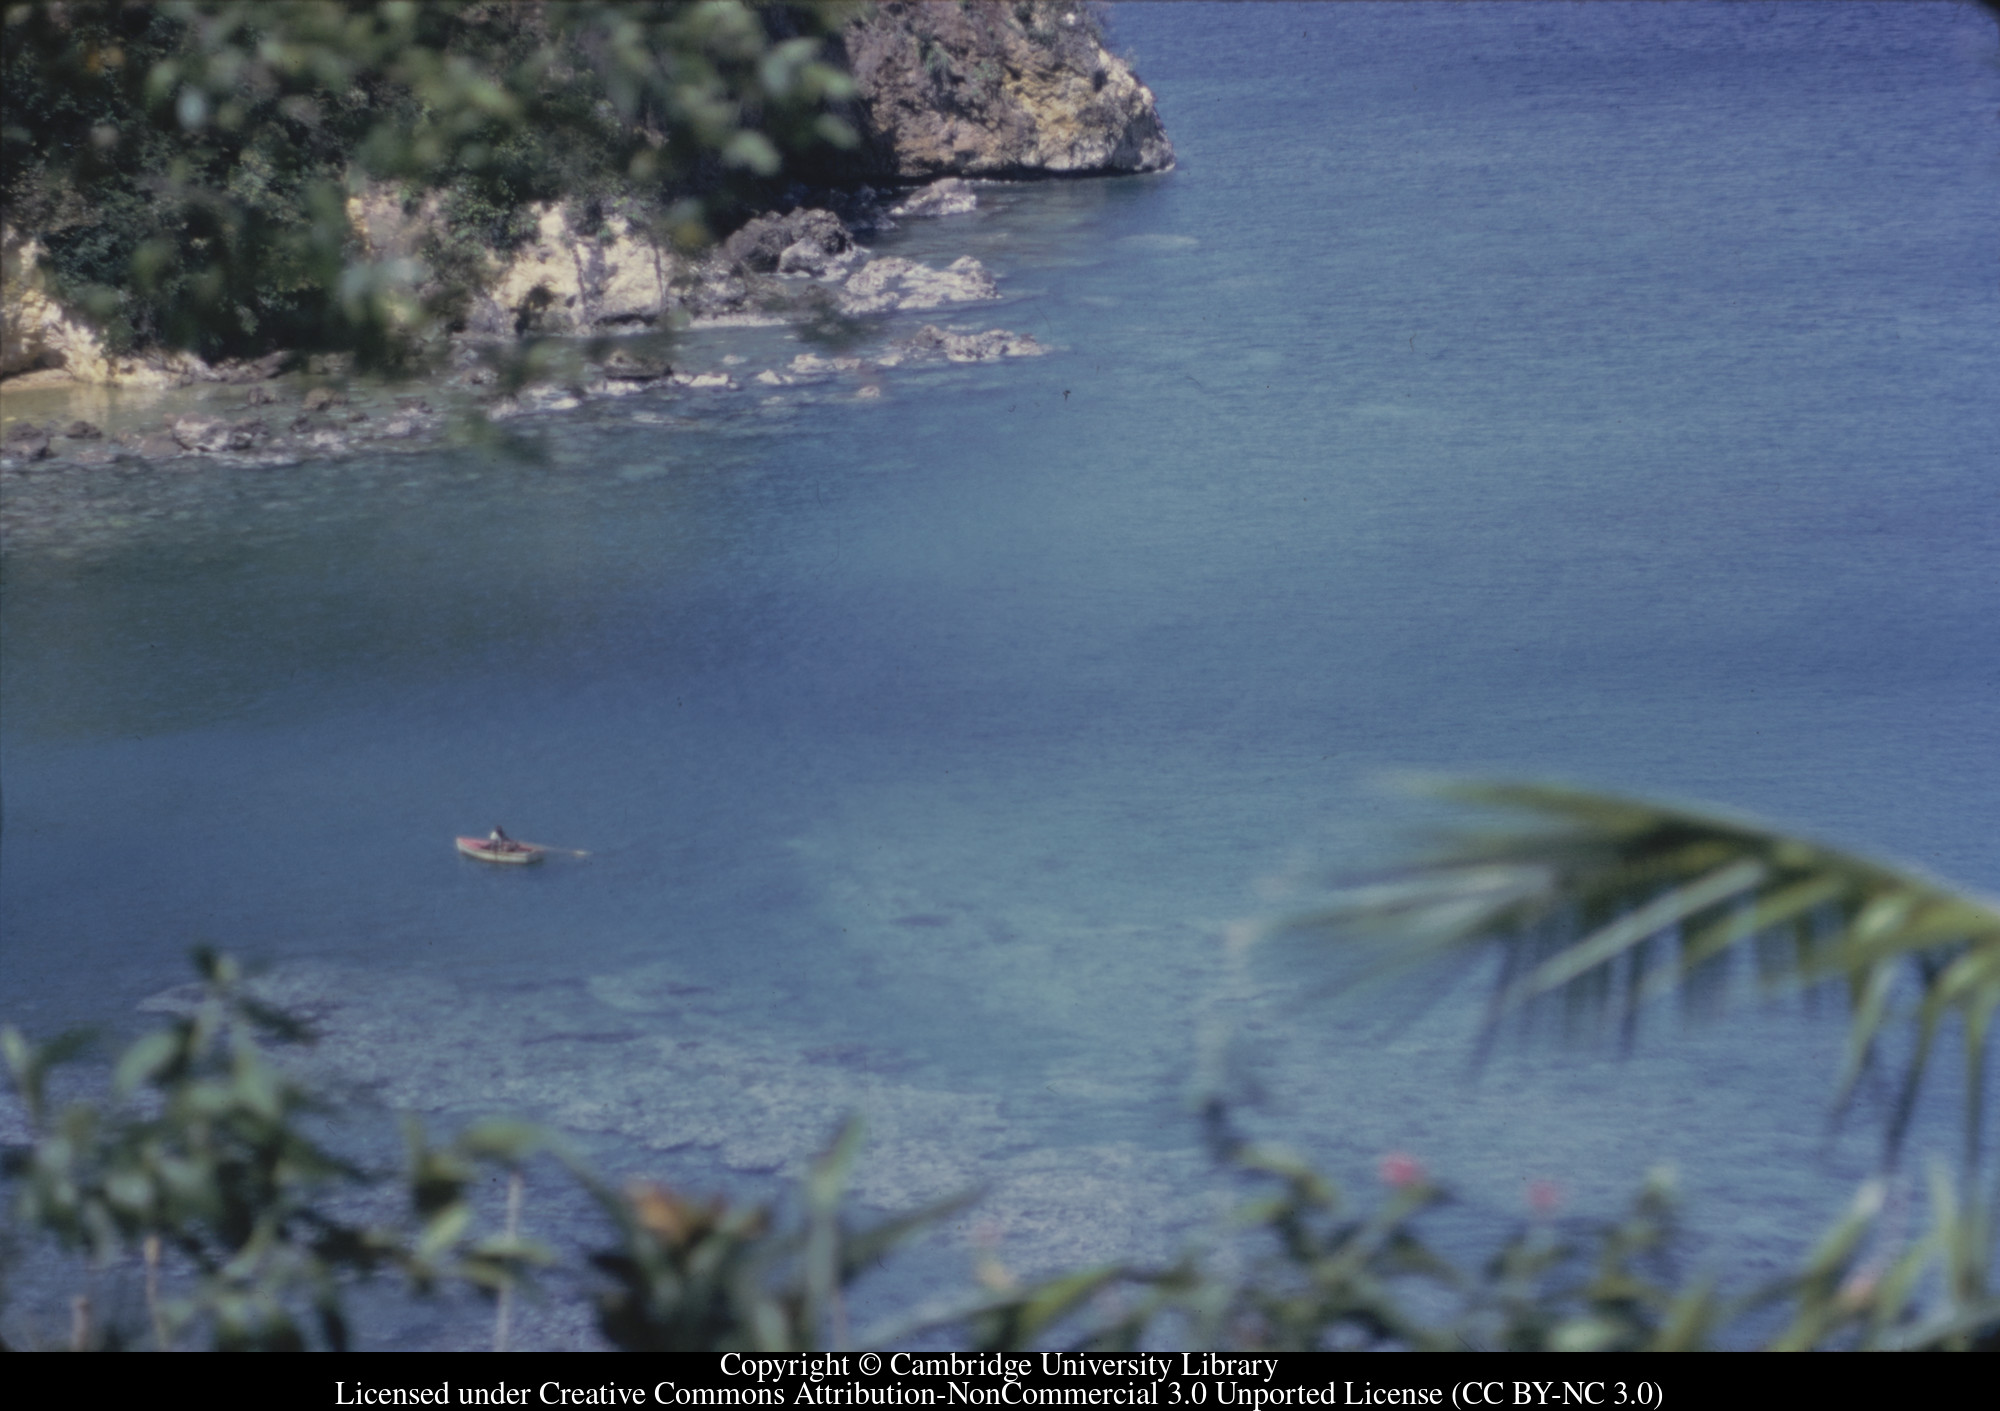 C [Ciceron] : PerÃ© Bay from lawn : clear sea and reef, 1971-06